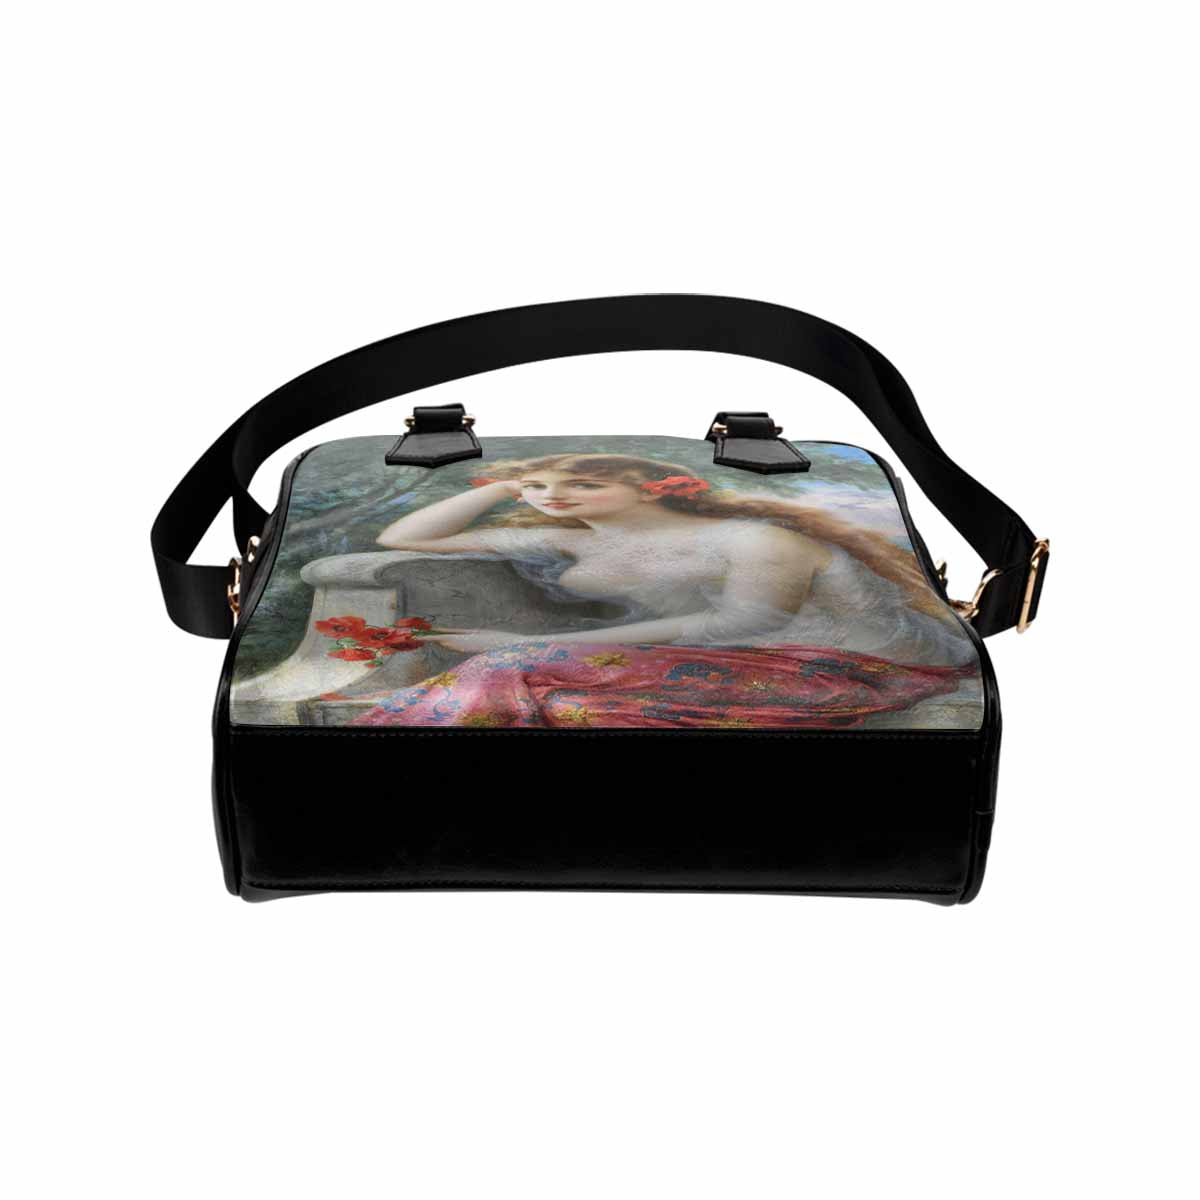 Victorian Lady design handbag, Mod 19163453, Young Beauty with Poppies